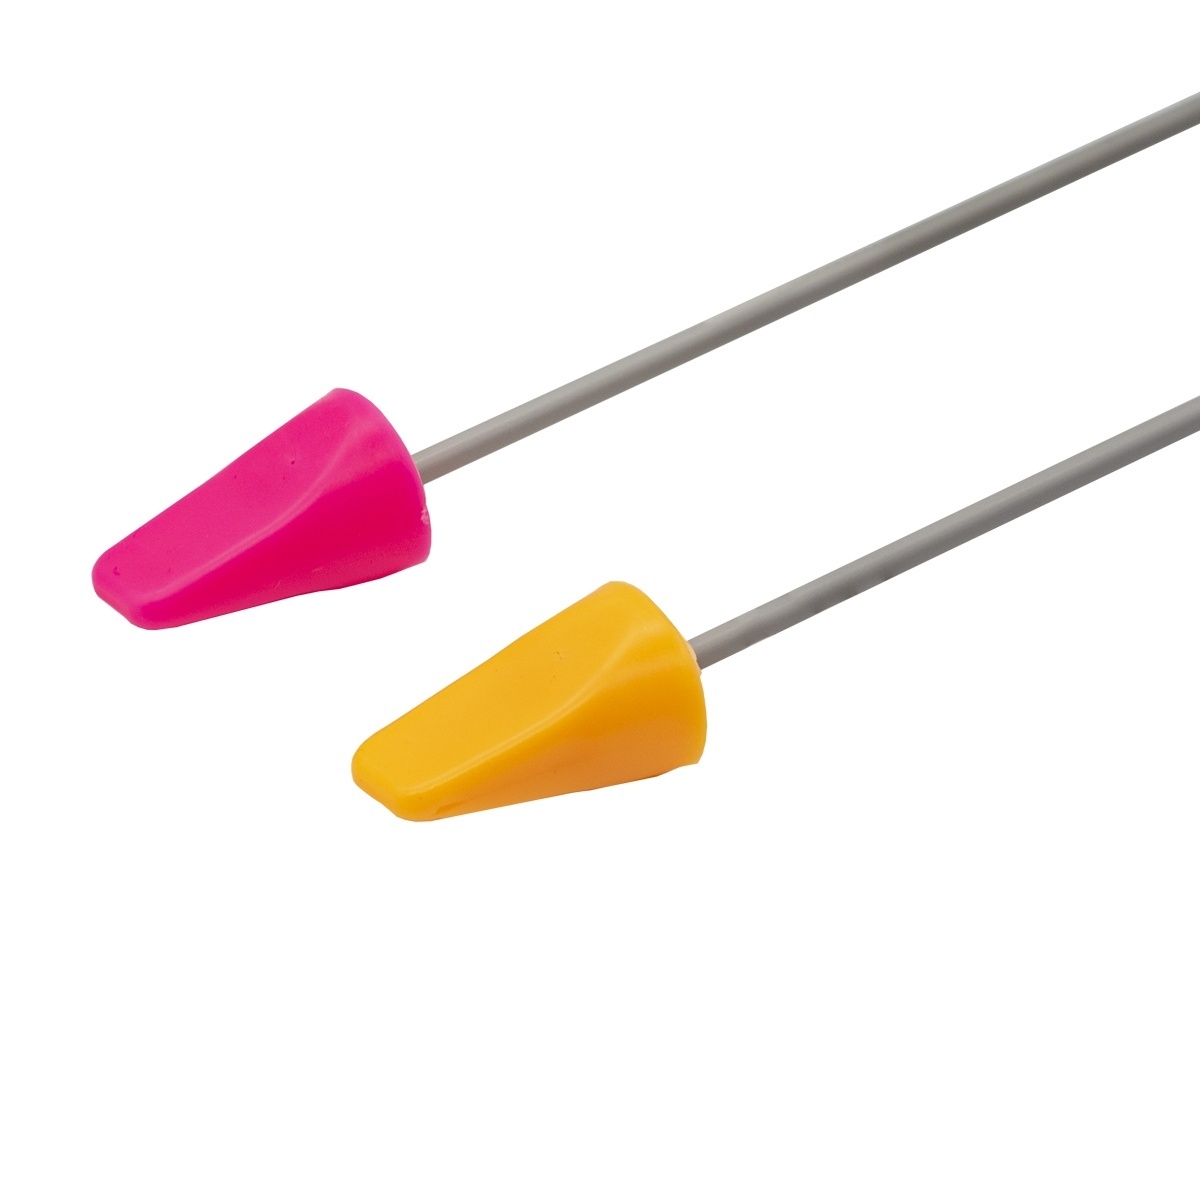 Neon Mix Knitting Needle Stoppers, code 7729890